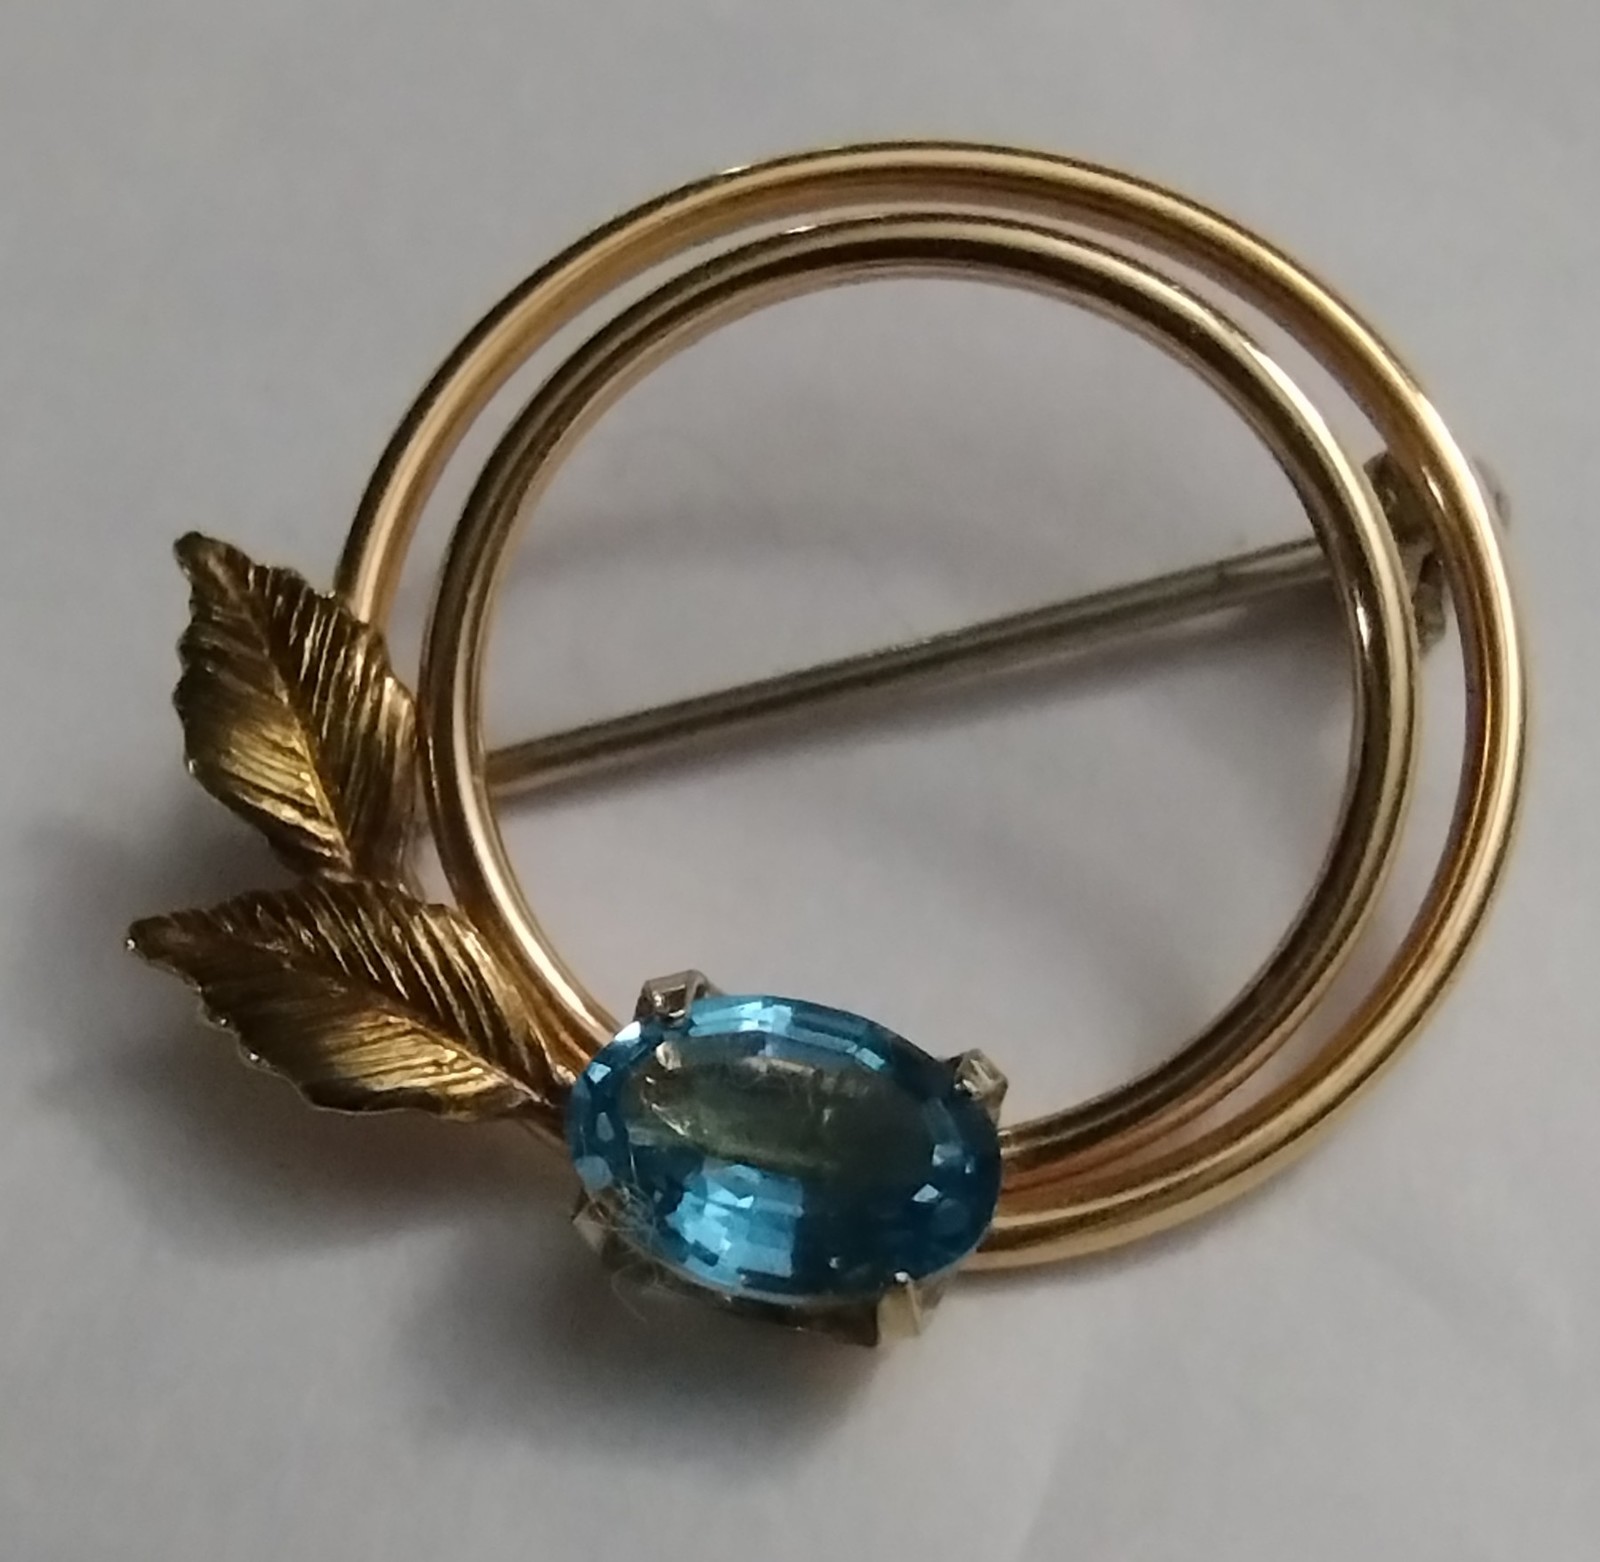 Primary image for Krementz© Circle Brooch with Blue Topaz Vintage